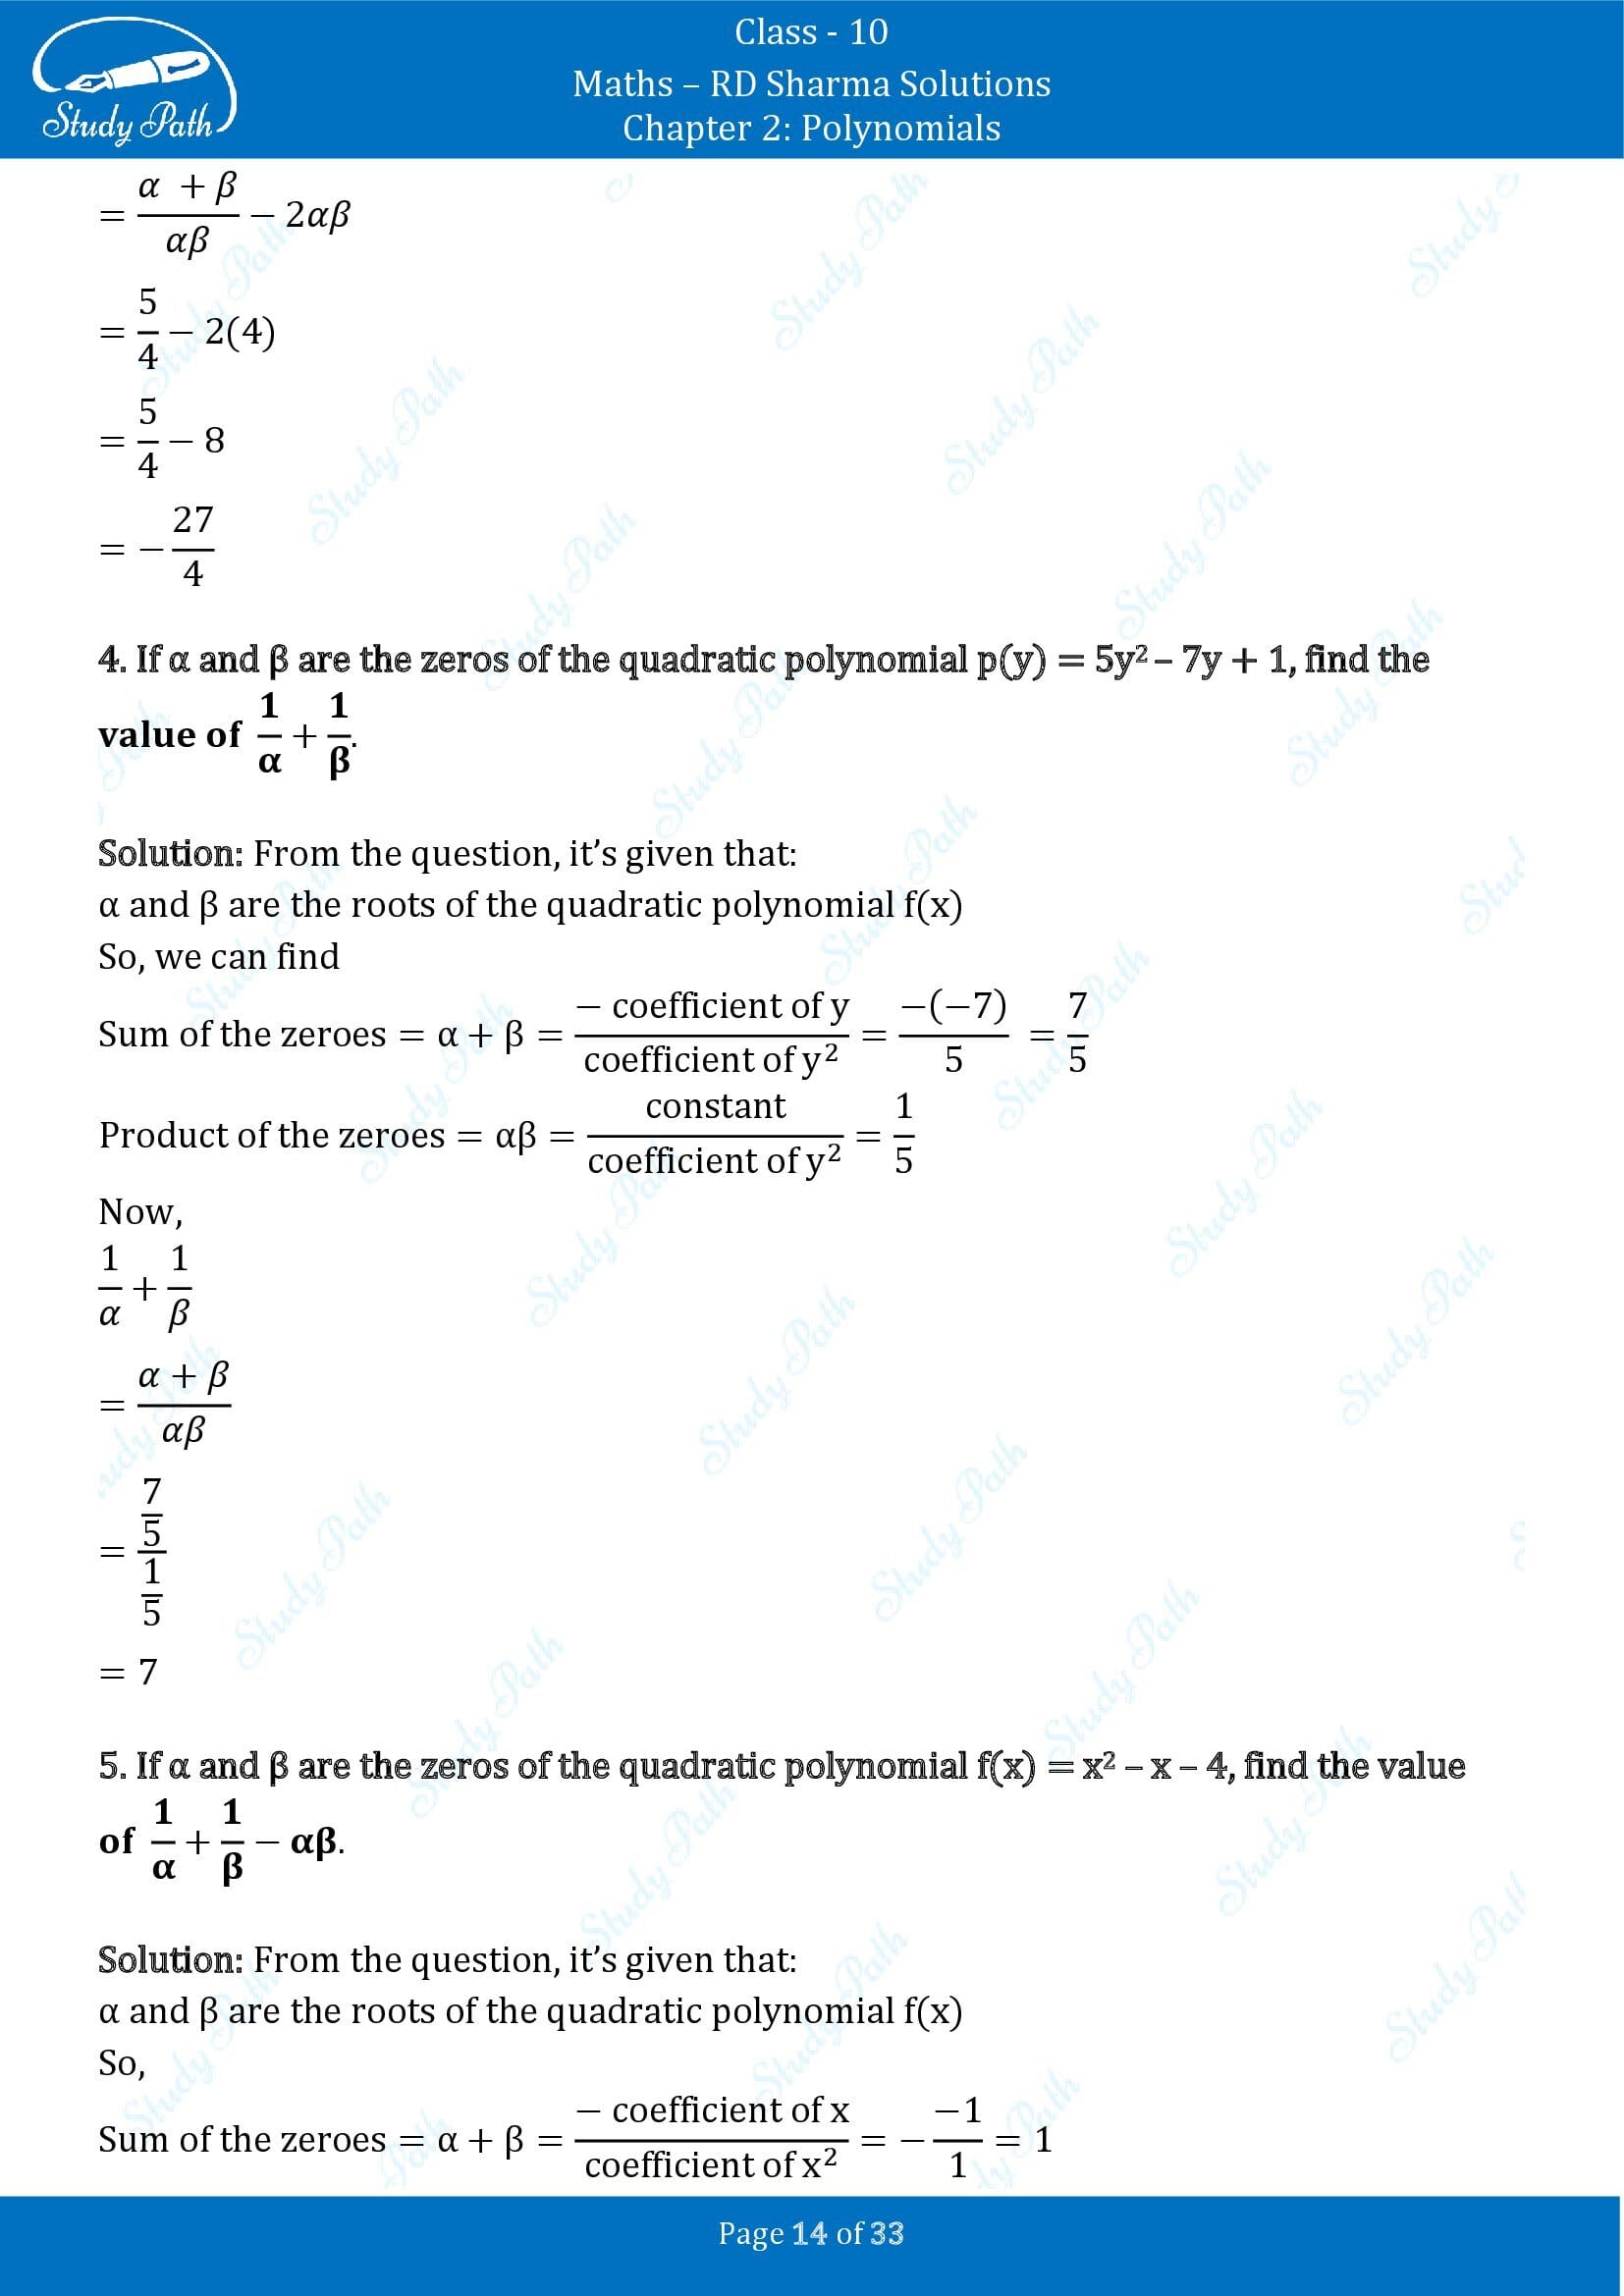 RD Sharma Solutions Class 10 Chapter 2 Polynomials Exercise 2.1 00014